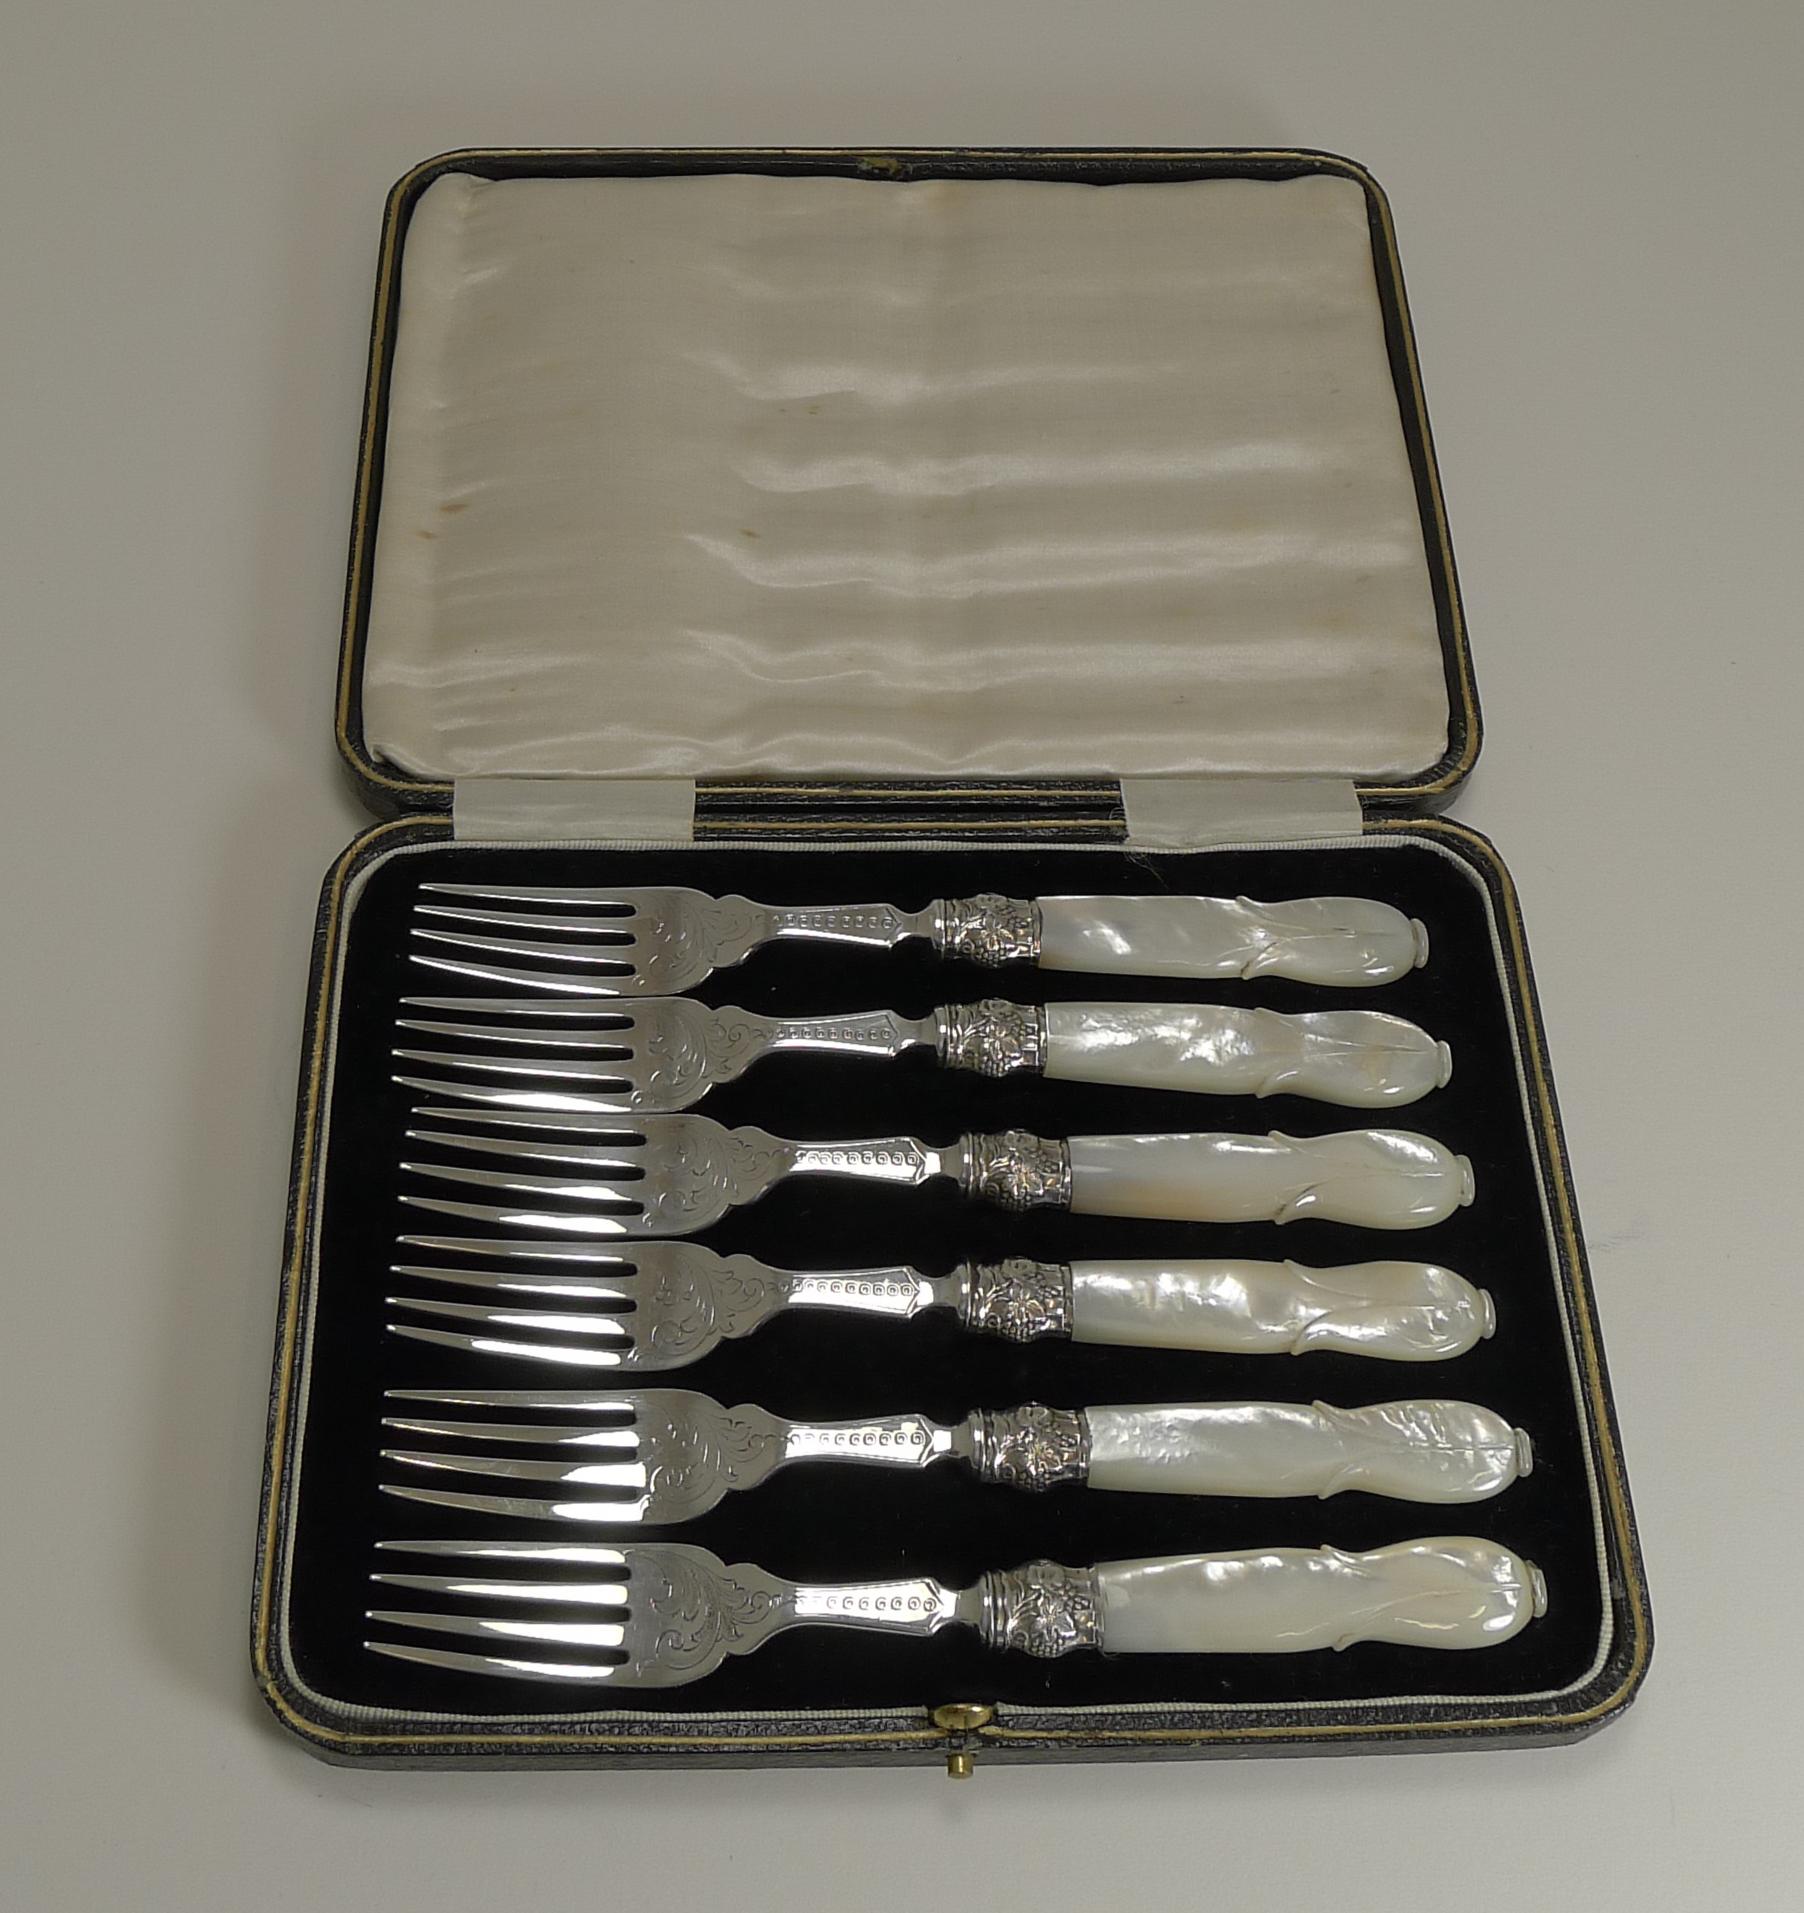 A wonderful set of six desert, fruit or cake forks sitting in a presentation box, these would make a wonderful gift.

The forks are made from sterling silver, made by the silversmith, Martin Hall and Co., each hallmarked for Sheffield 1873. This